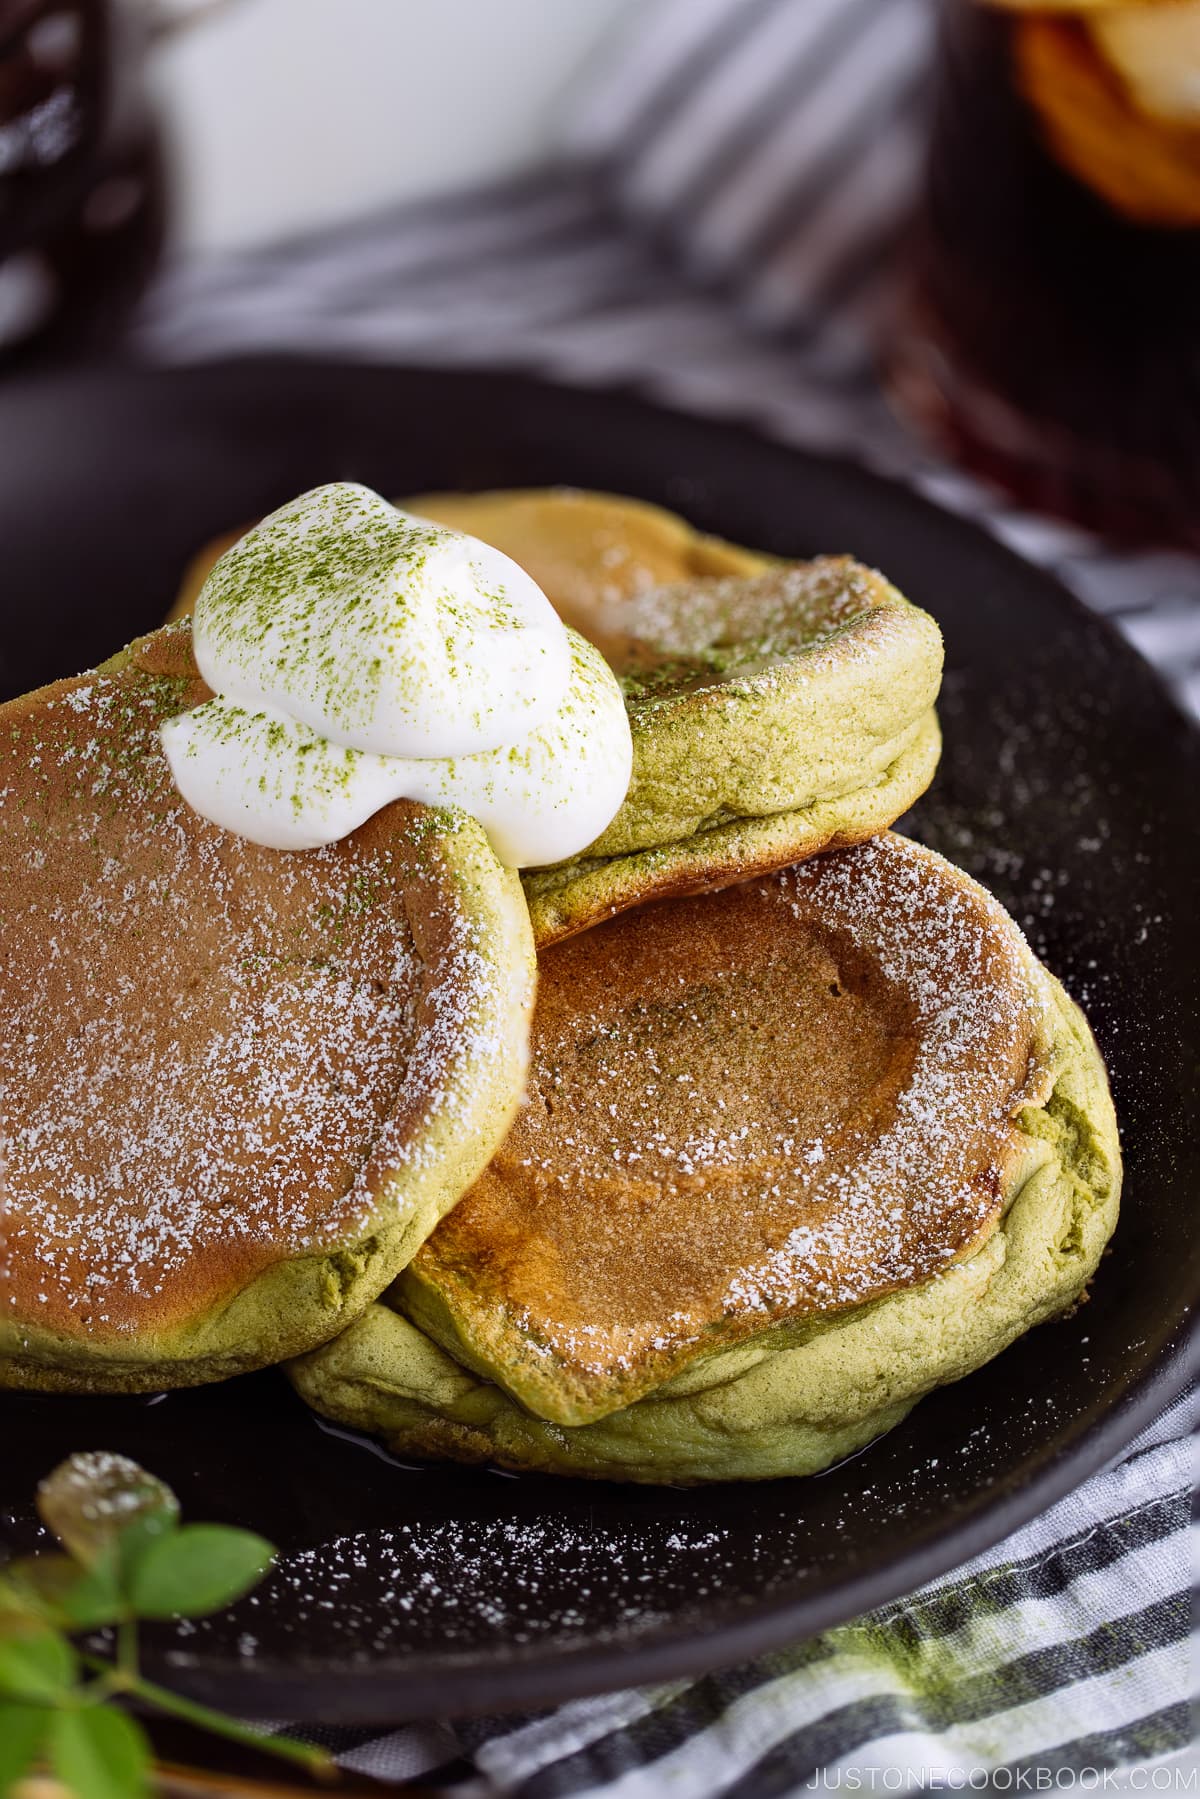 A black plate containing 3 matcha souffle pancakes with fresh whipped cream and maple syrup on the side.